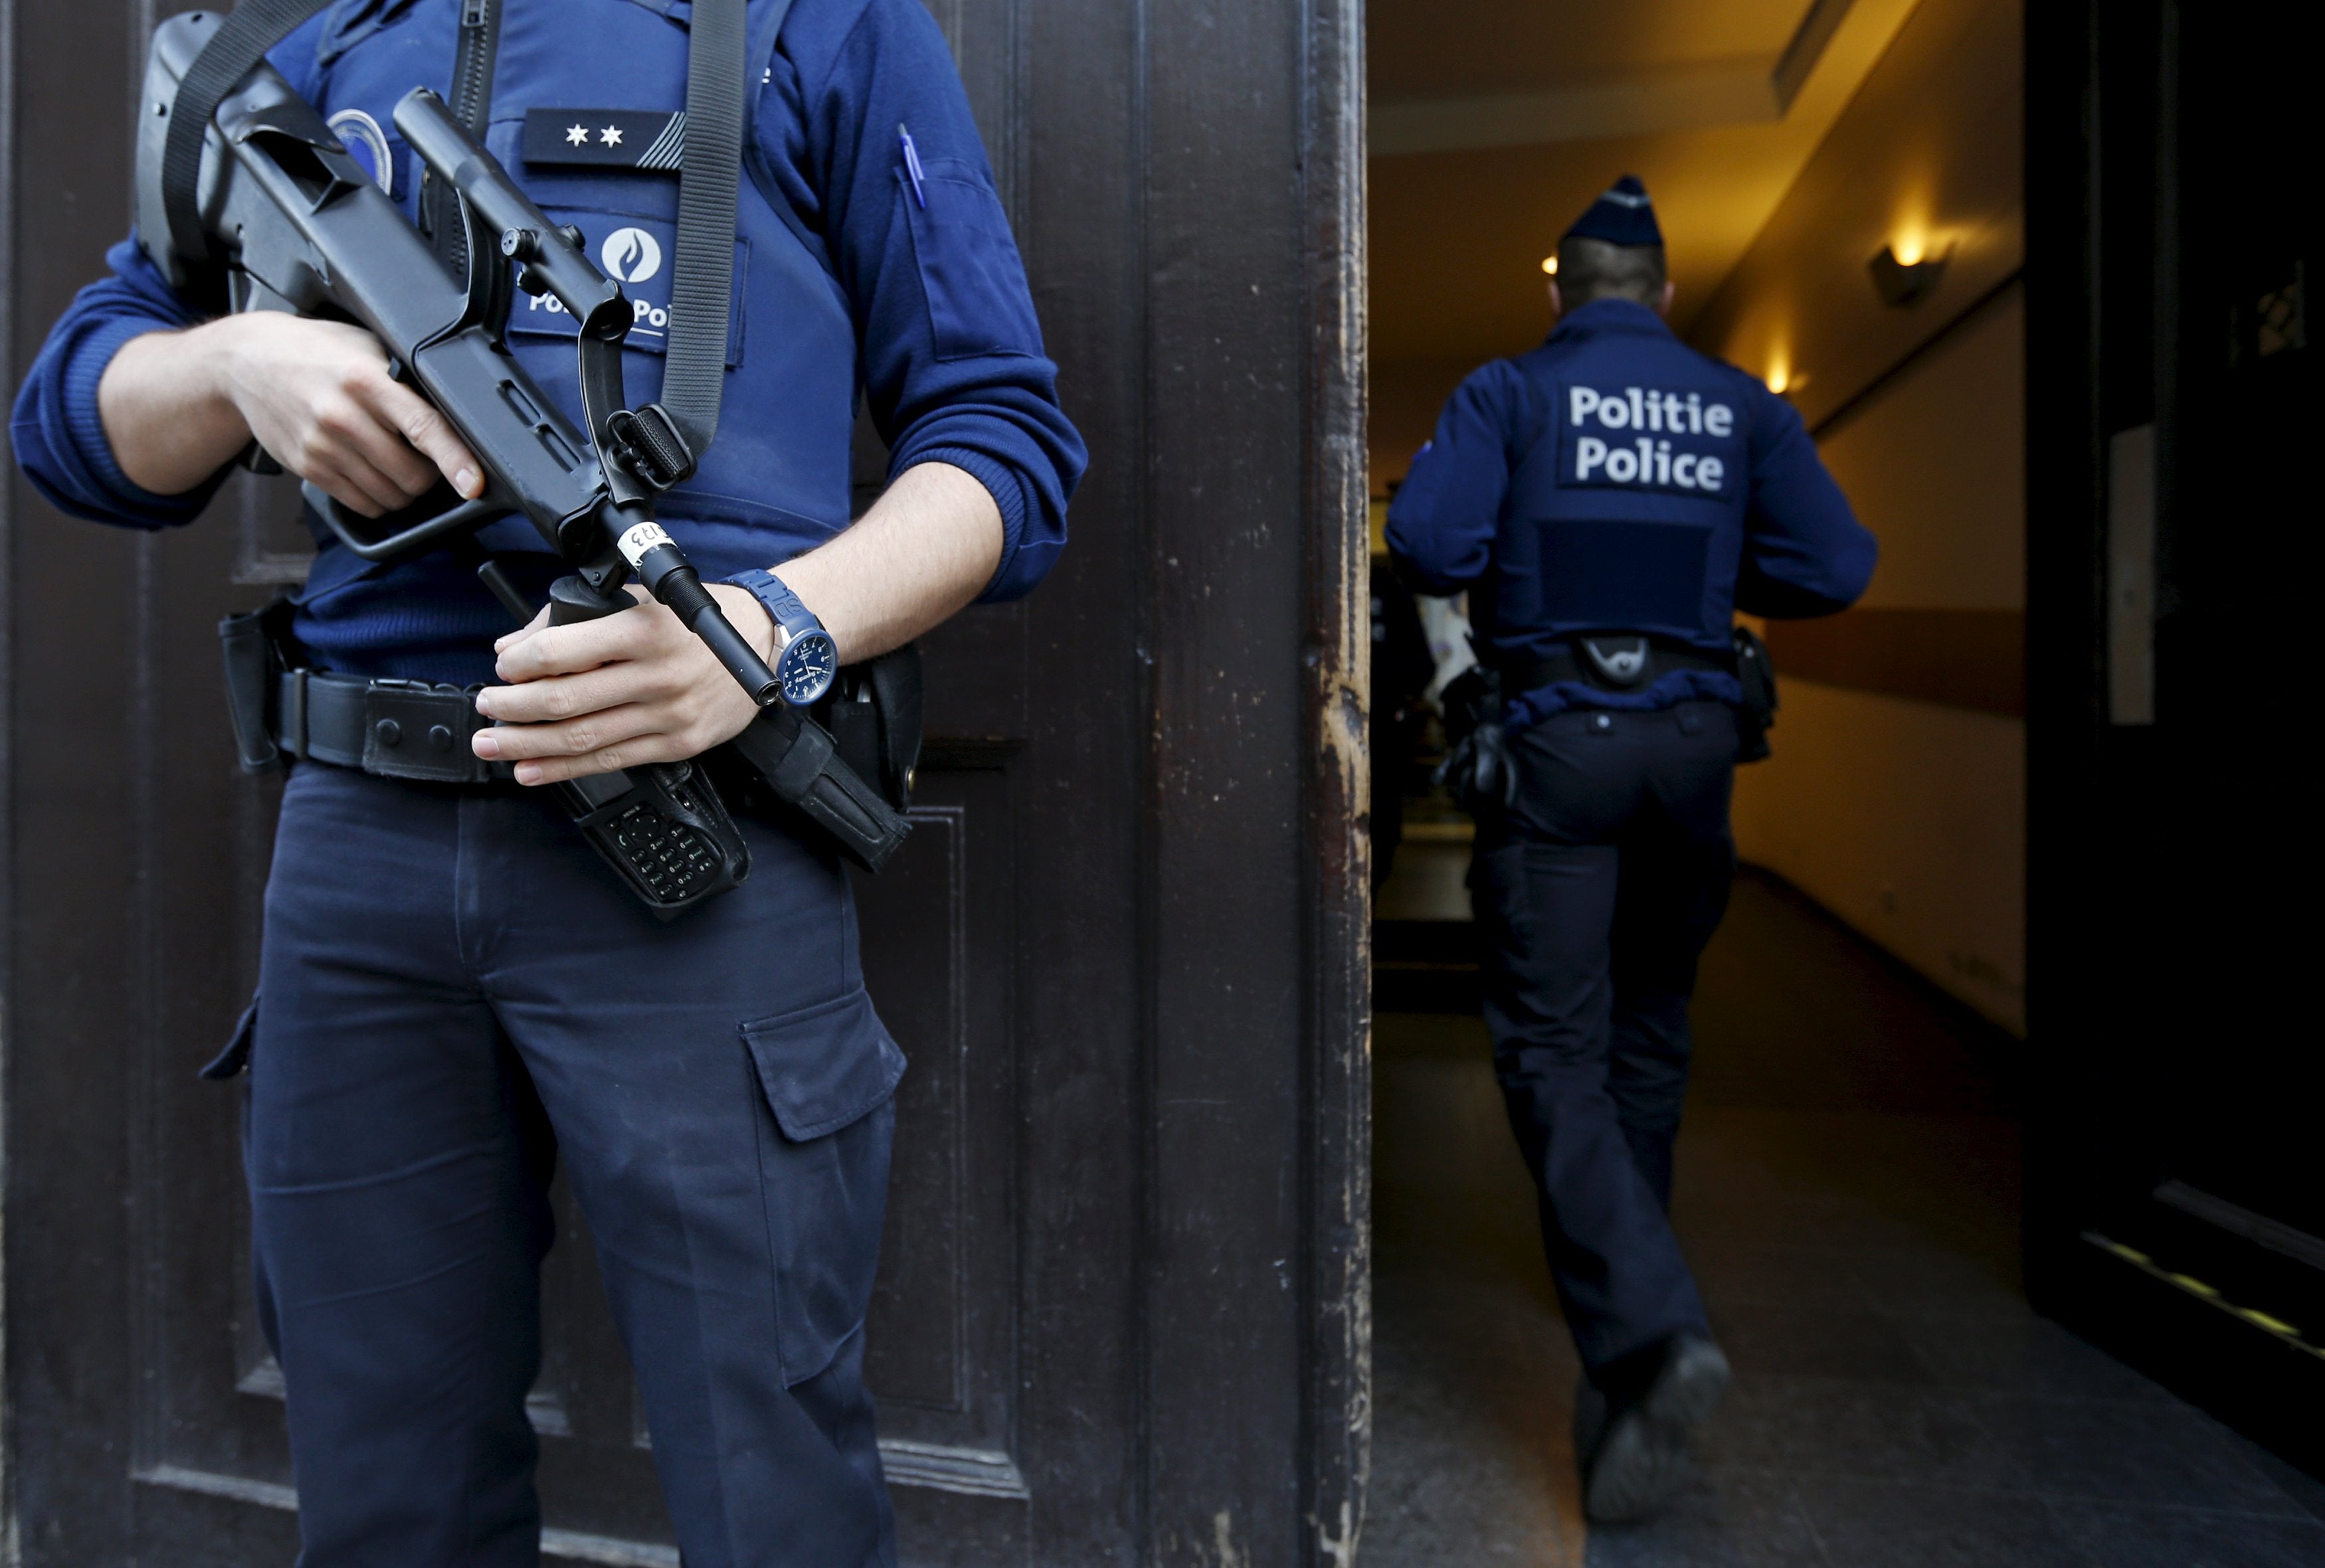 Police across Europe arrest over 100 mafia suspects, allege South America trafficking ties